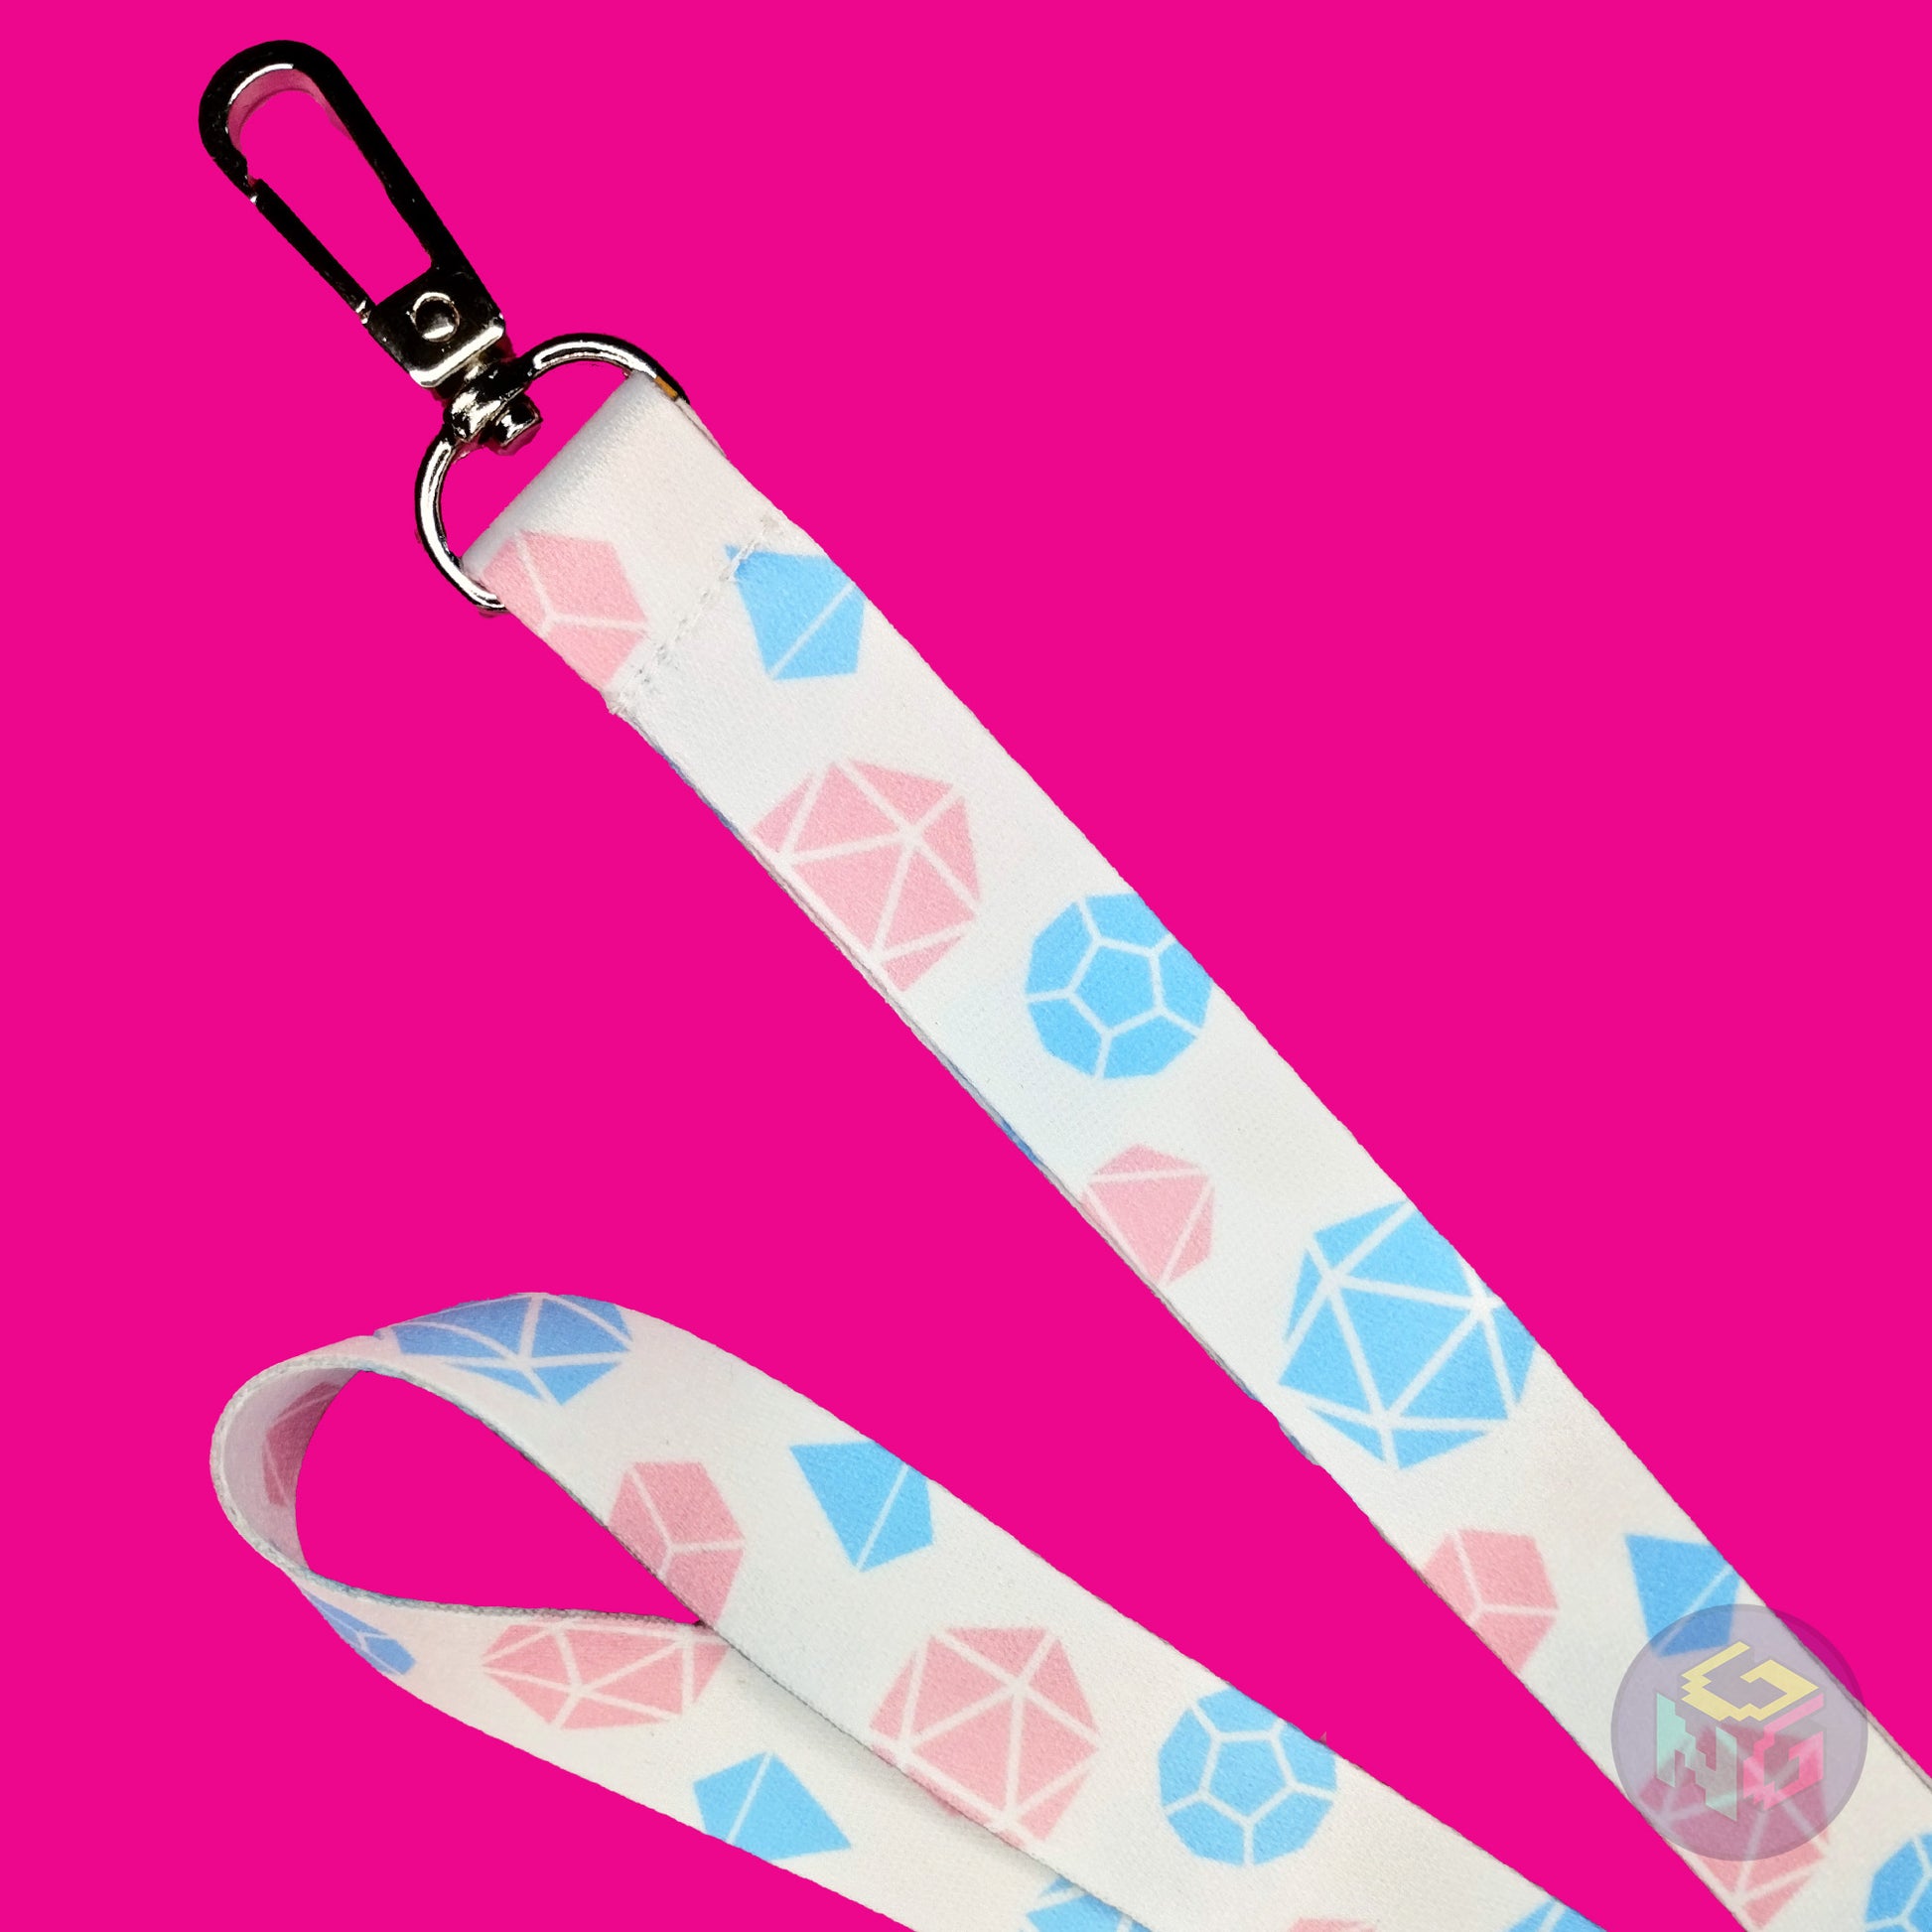 close up detail of the transgender dungeons and dragons lanyard showing the lobster clasp, pink d20s, blue d12s, and other dice